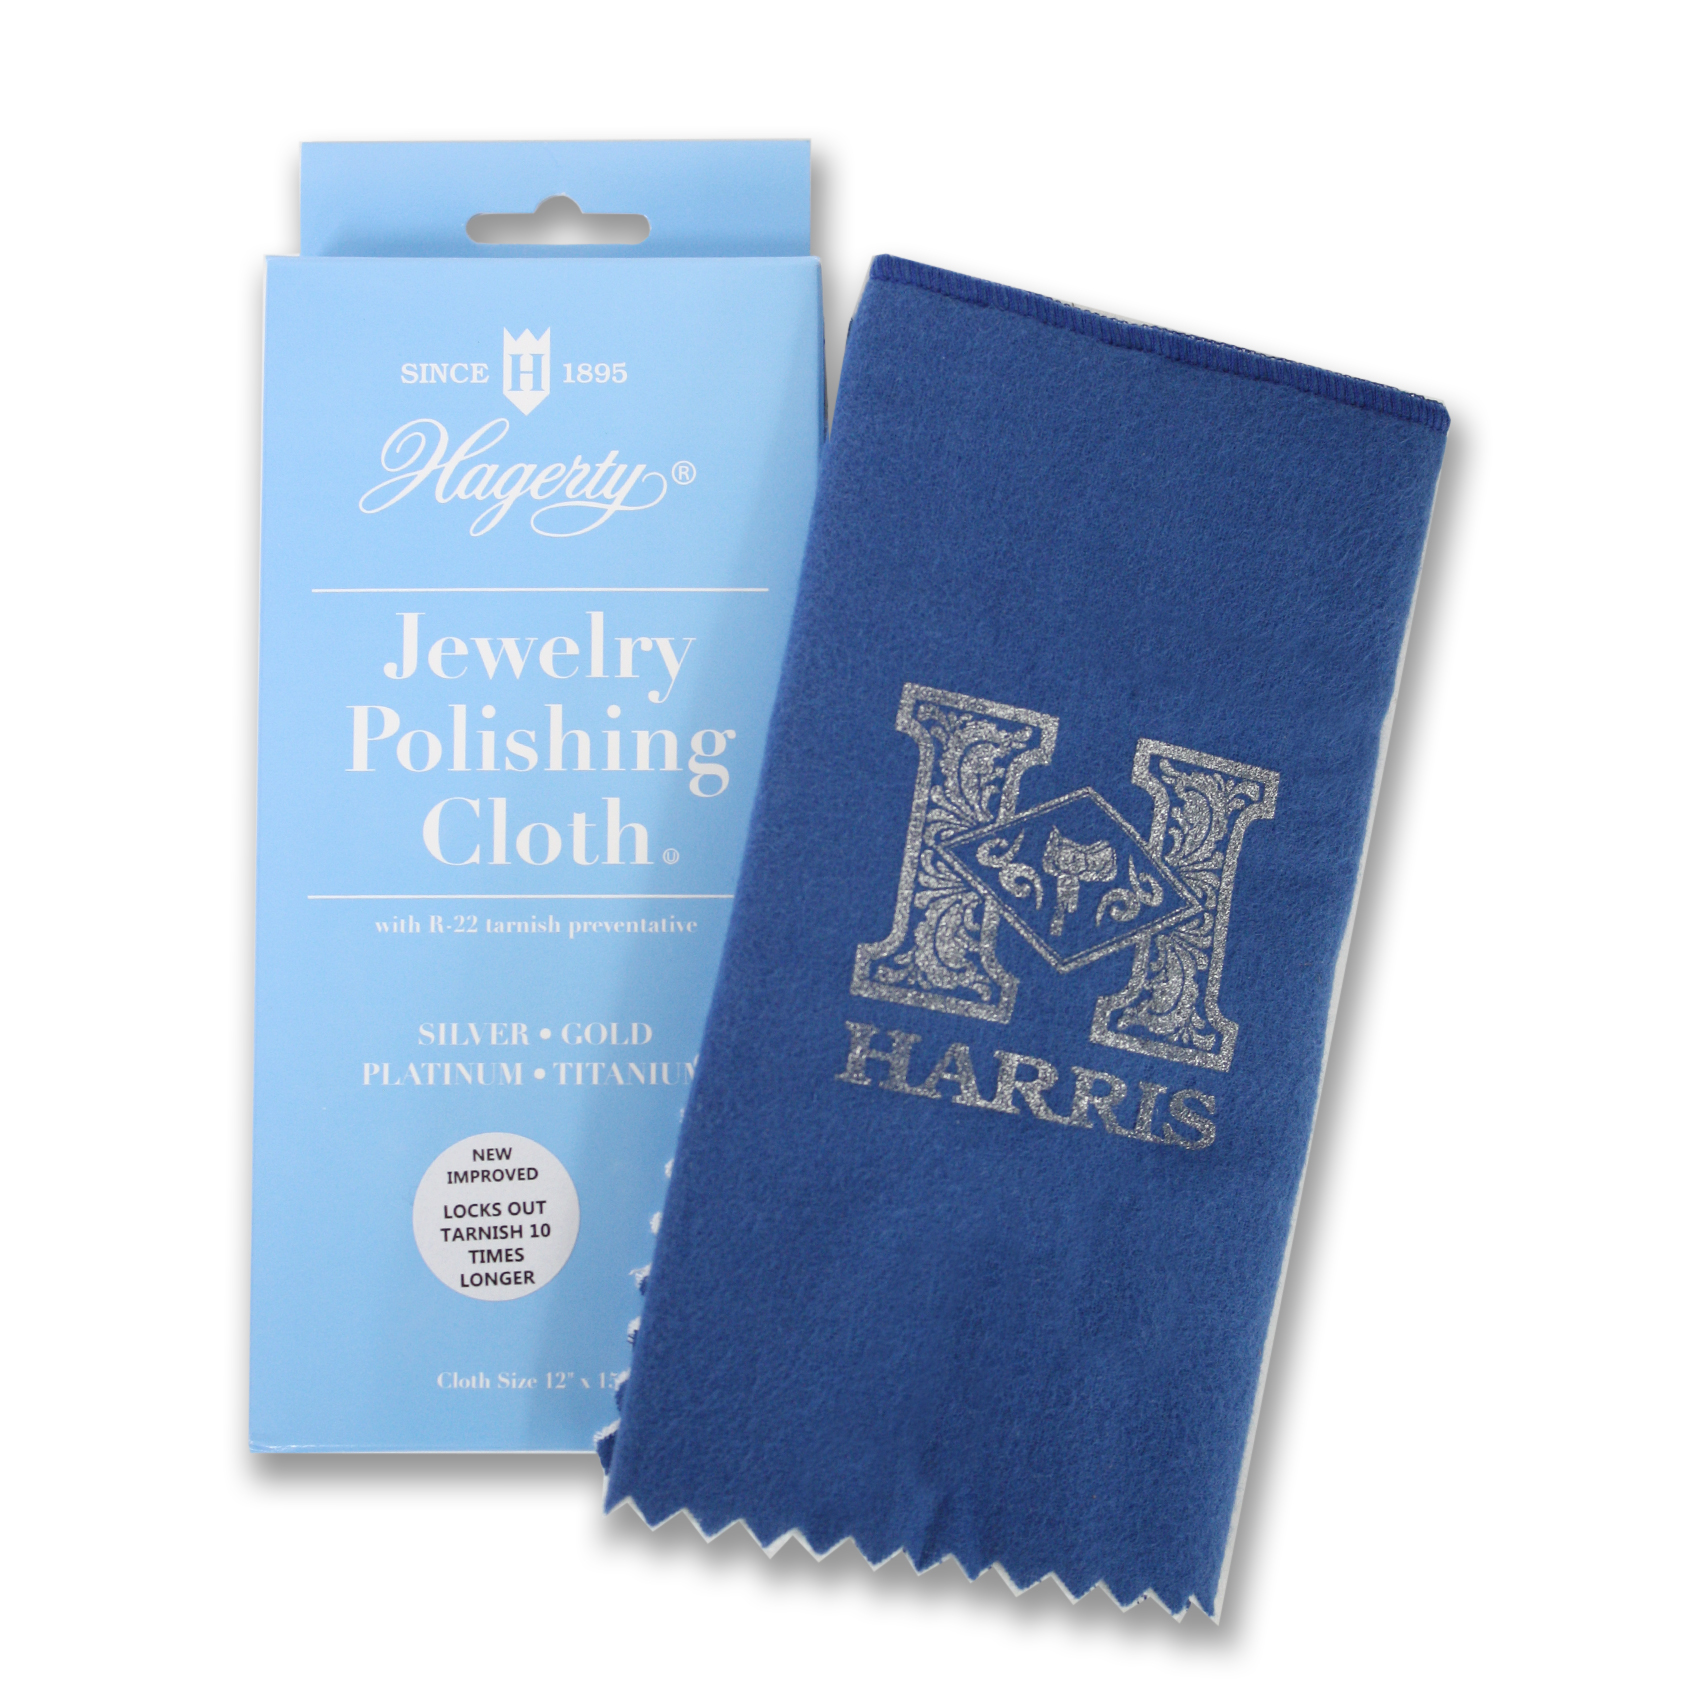 Hagerty Silver cleaning cloths 36 x 30 cm –